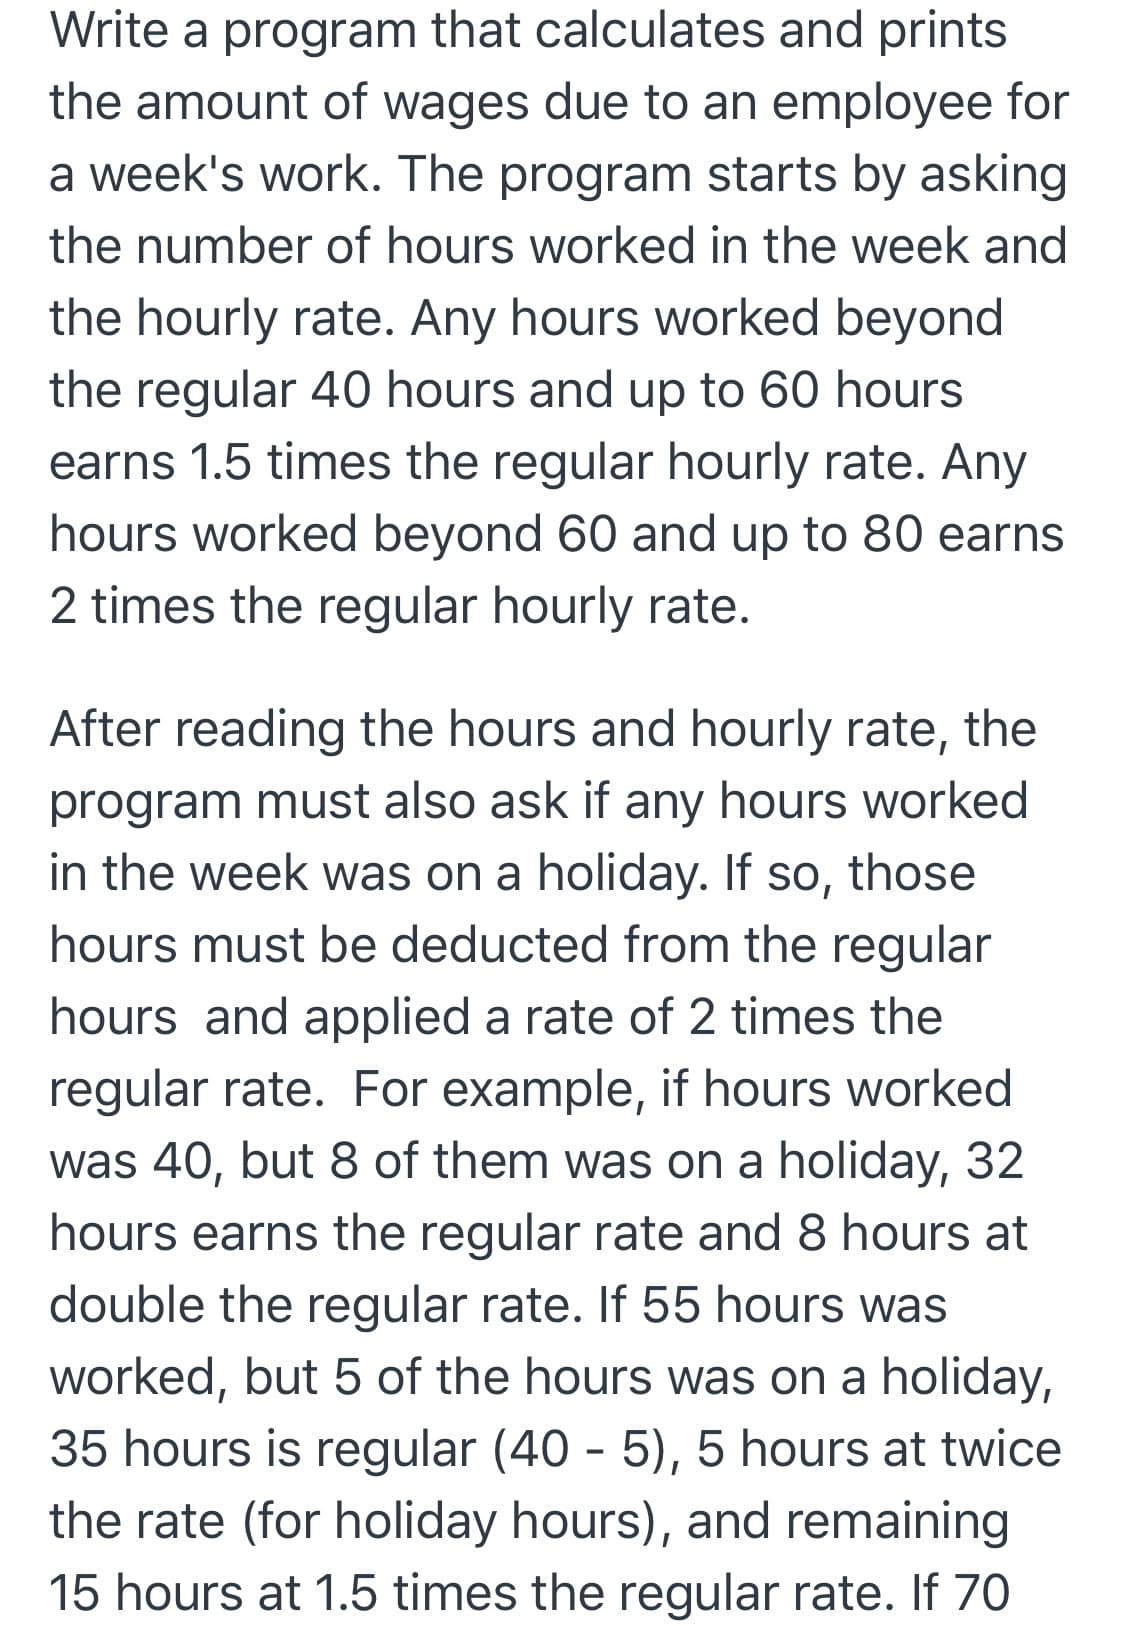 Write a program that calculates and prints
the amount of wages due to an employee for
a week's work. The program starts by asking
the number of hours worked in the week and
the hourly rate. Any hours worked beyond
the regular 40 hours and up to 60 hours
earns 1.5 times the regular hourly rate. Any
hours worked beyond 60 and up to 80 earns
2 times the regular hourly rate.
After reading the hours and hourly rate, the
program must also ask if any hours worked
in the week was on a holiday. If so, those
hours must be deducted from the regular
hours and applied a rate of 2 times the
regular rate. For example, if hours worked
was 40, but 8 of them was holiday, 32
on a
hours earns the regular rate and 8 hours at
double the regular rate. If 55 hours was
worked, but 5 of the hours was on a holiday,
35 hours is regular (40 - 5), 5 hours at twice
the rate (for holiday hours), and remaining
15 hours at 1.5 times the regular rate. If 70
